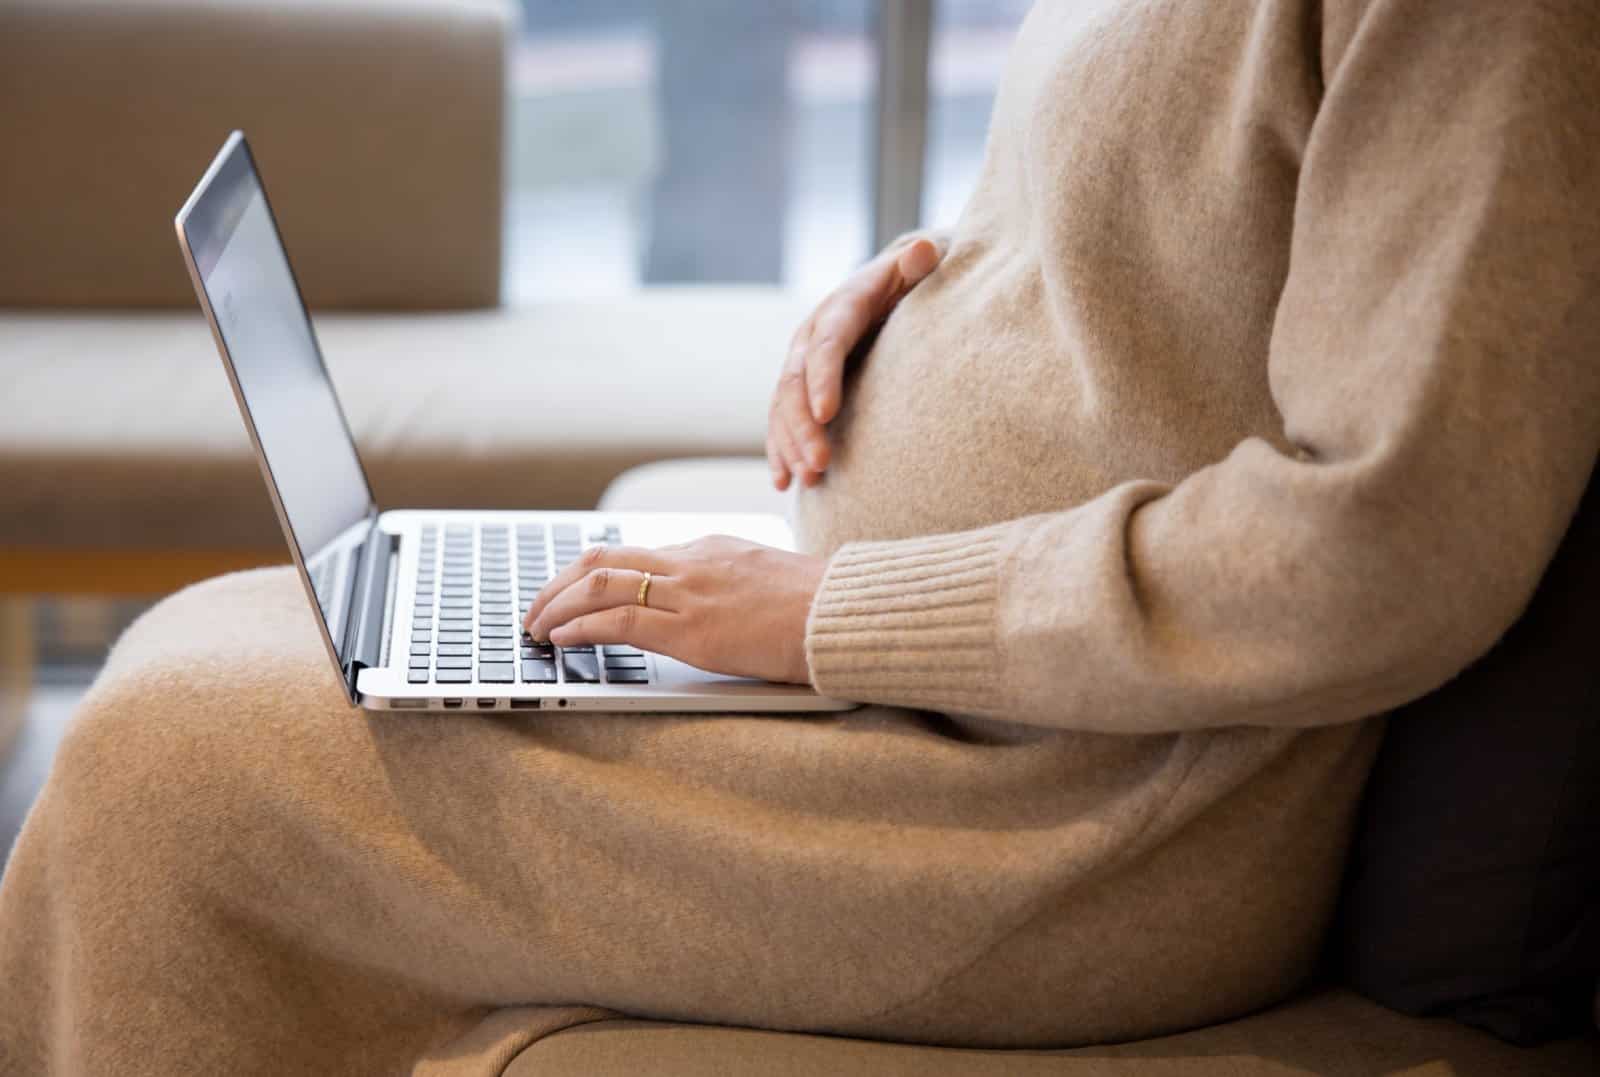 mage Credit: Shutterstock / bigshot01 <p><span>The U.S. lags behind in paid maternity leave, putting pressure on mothers to return to work quickly after childbirth, often before they’re emotionally or physically ready.</span></p>